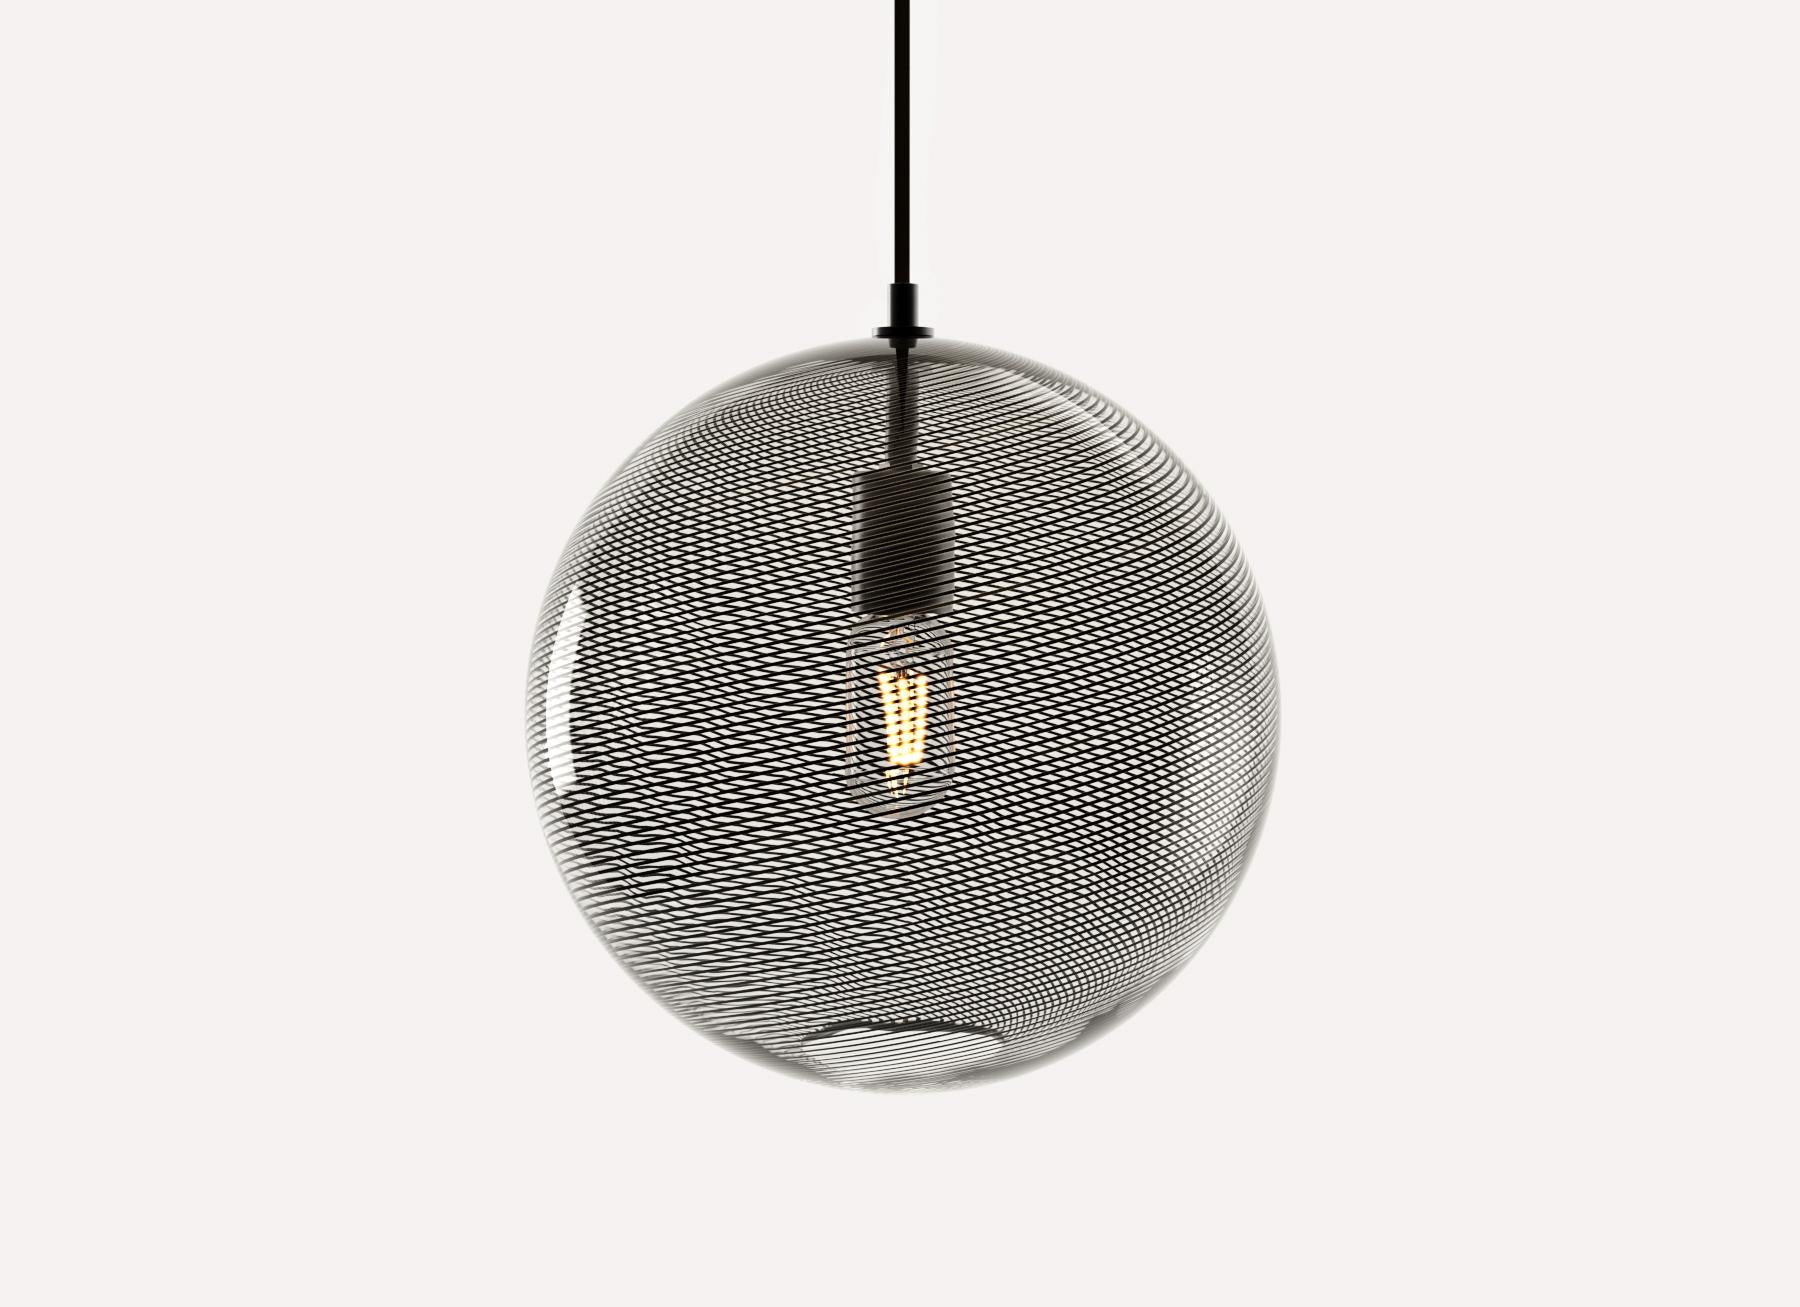 Hand-Crafted KEEP Handblown Glass Globe Pendant Light, Mid-Century Inspired Patterned Glass For Sale